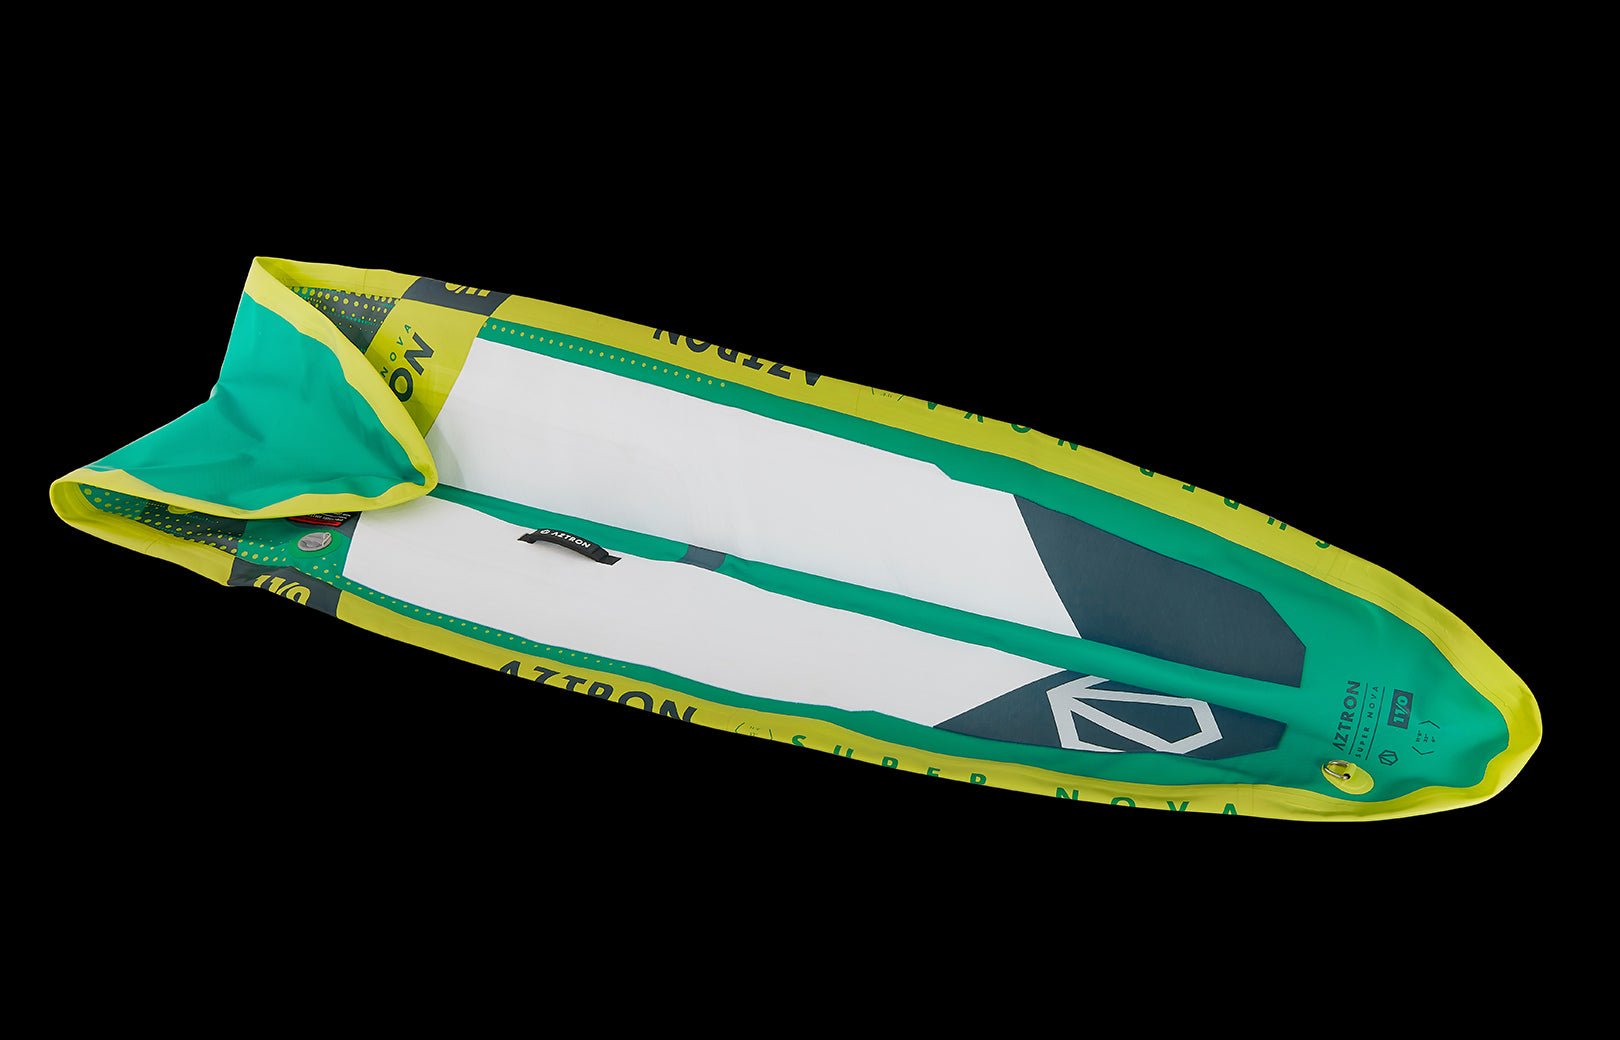 Aztron SuperNova 11'0" Inflatable Paddleboard Package - Worthing Watersports - - Aztron